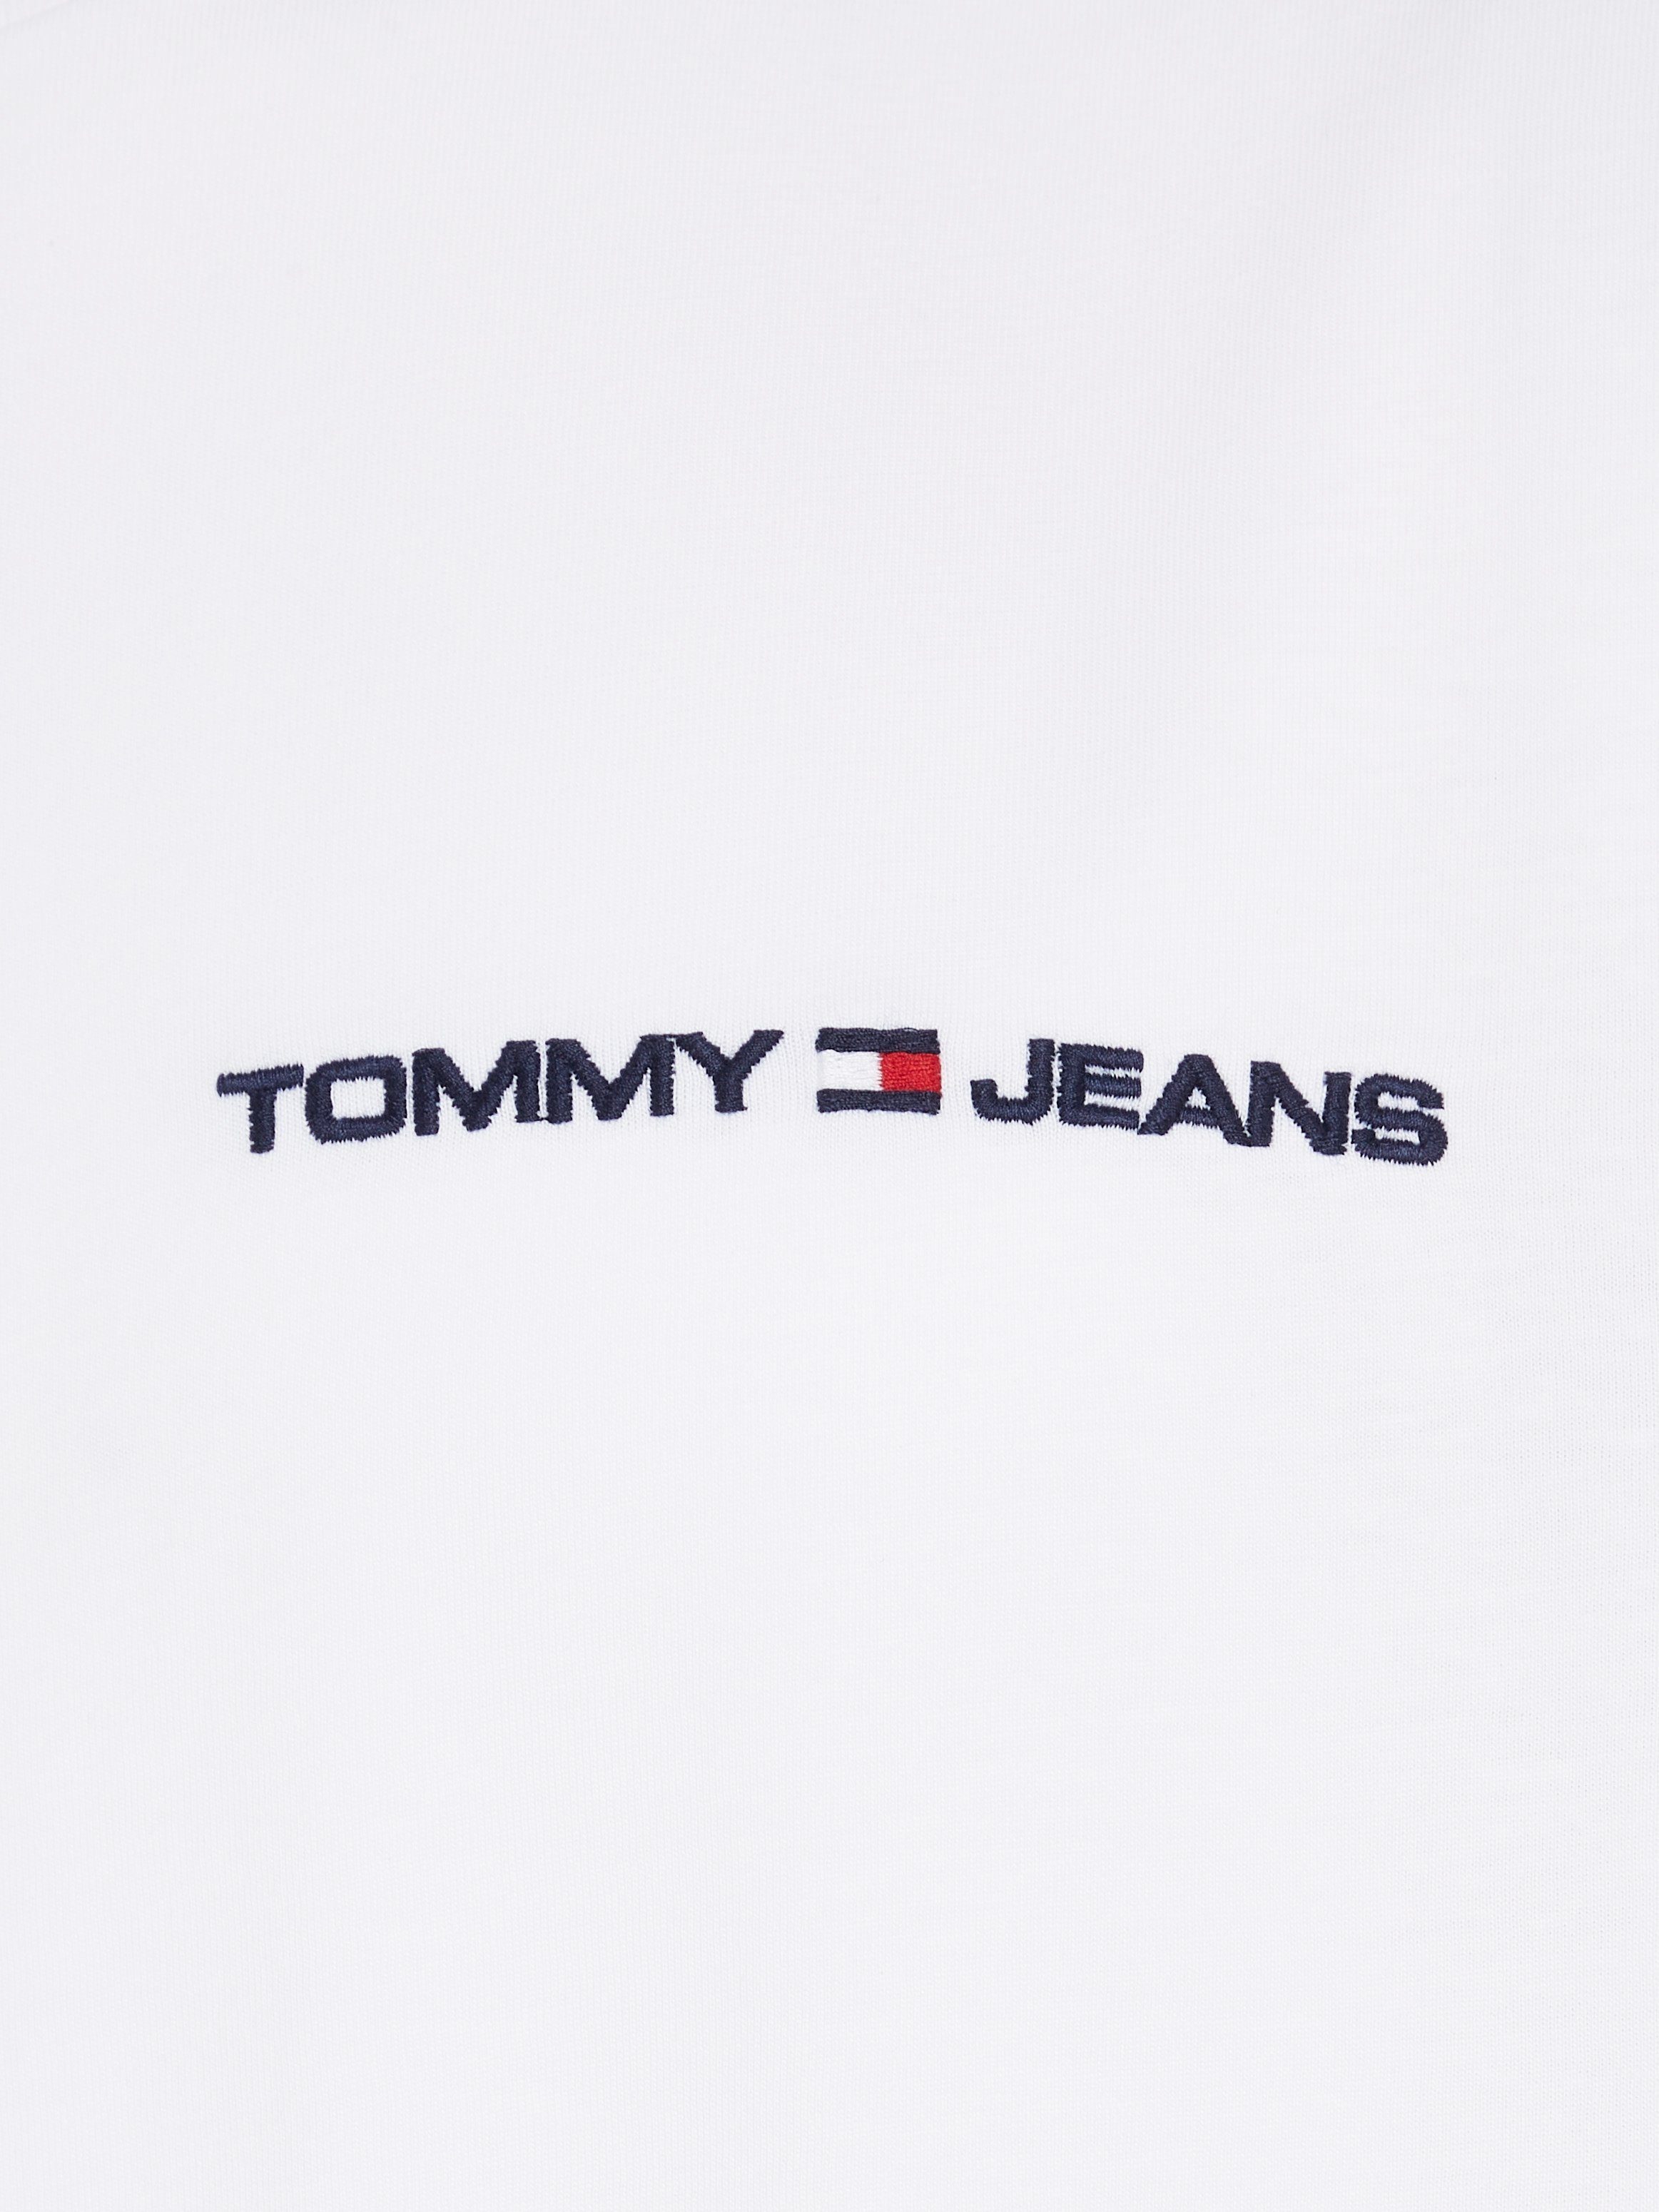 CLSC T-Shirt White CHEST Jeans LINEAR Tommy TJM TEE